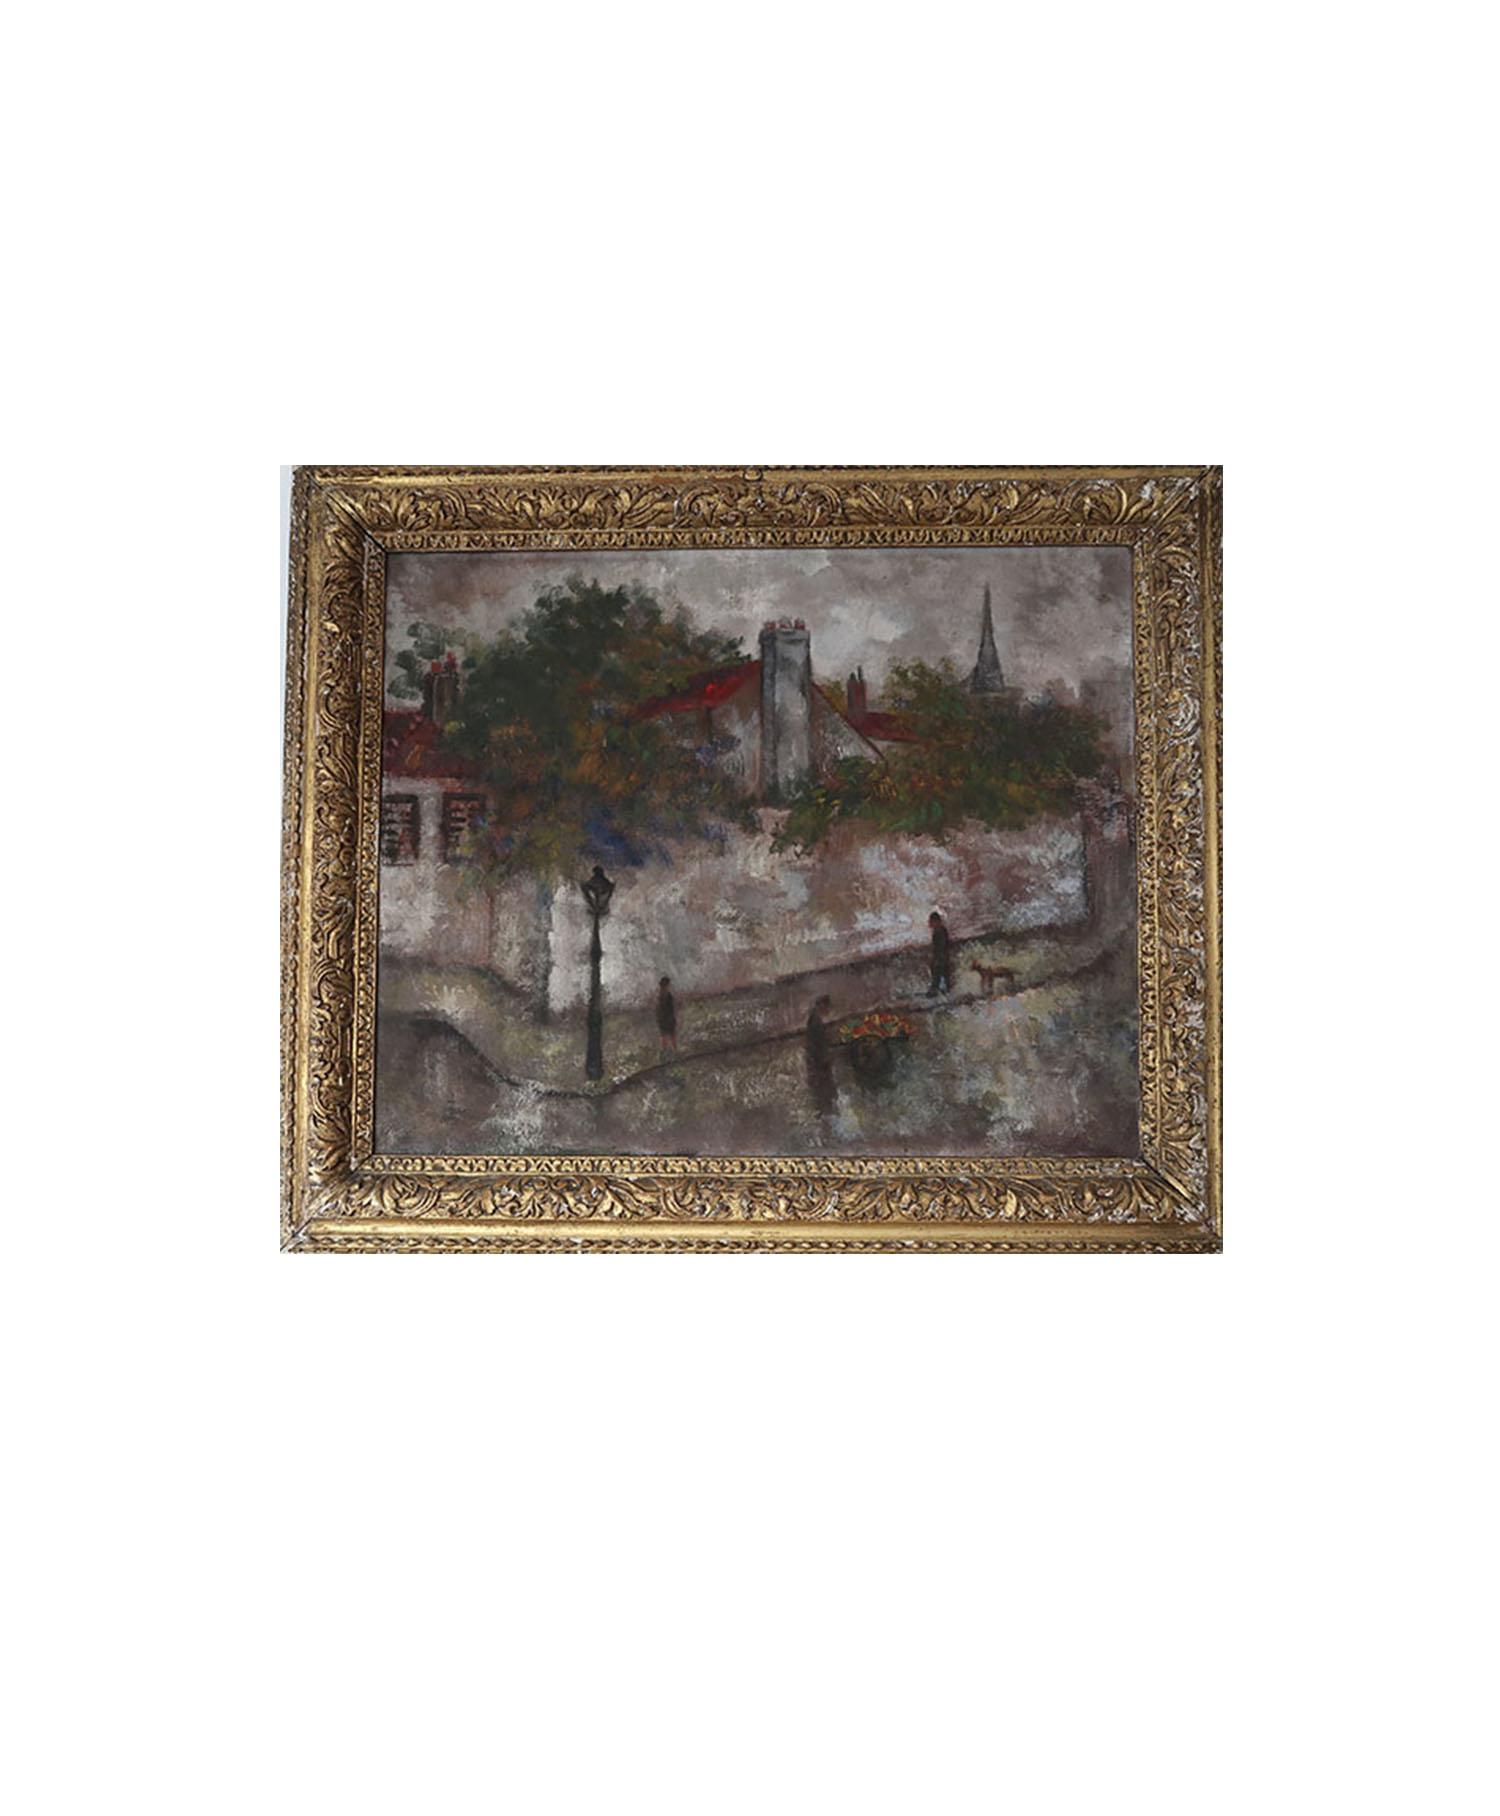 Wonderful post-impressionist oil painting of a Paris street scene by a good artist, Isaac Lichtenstein. Possibly Montmartre district.

Oil on canvas. No title.

Signed and dated 1924 on verso.

Also an interesting inventory mark on stretcher